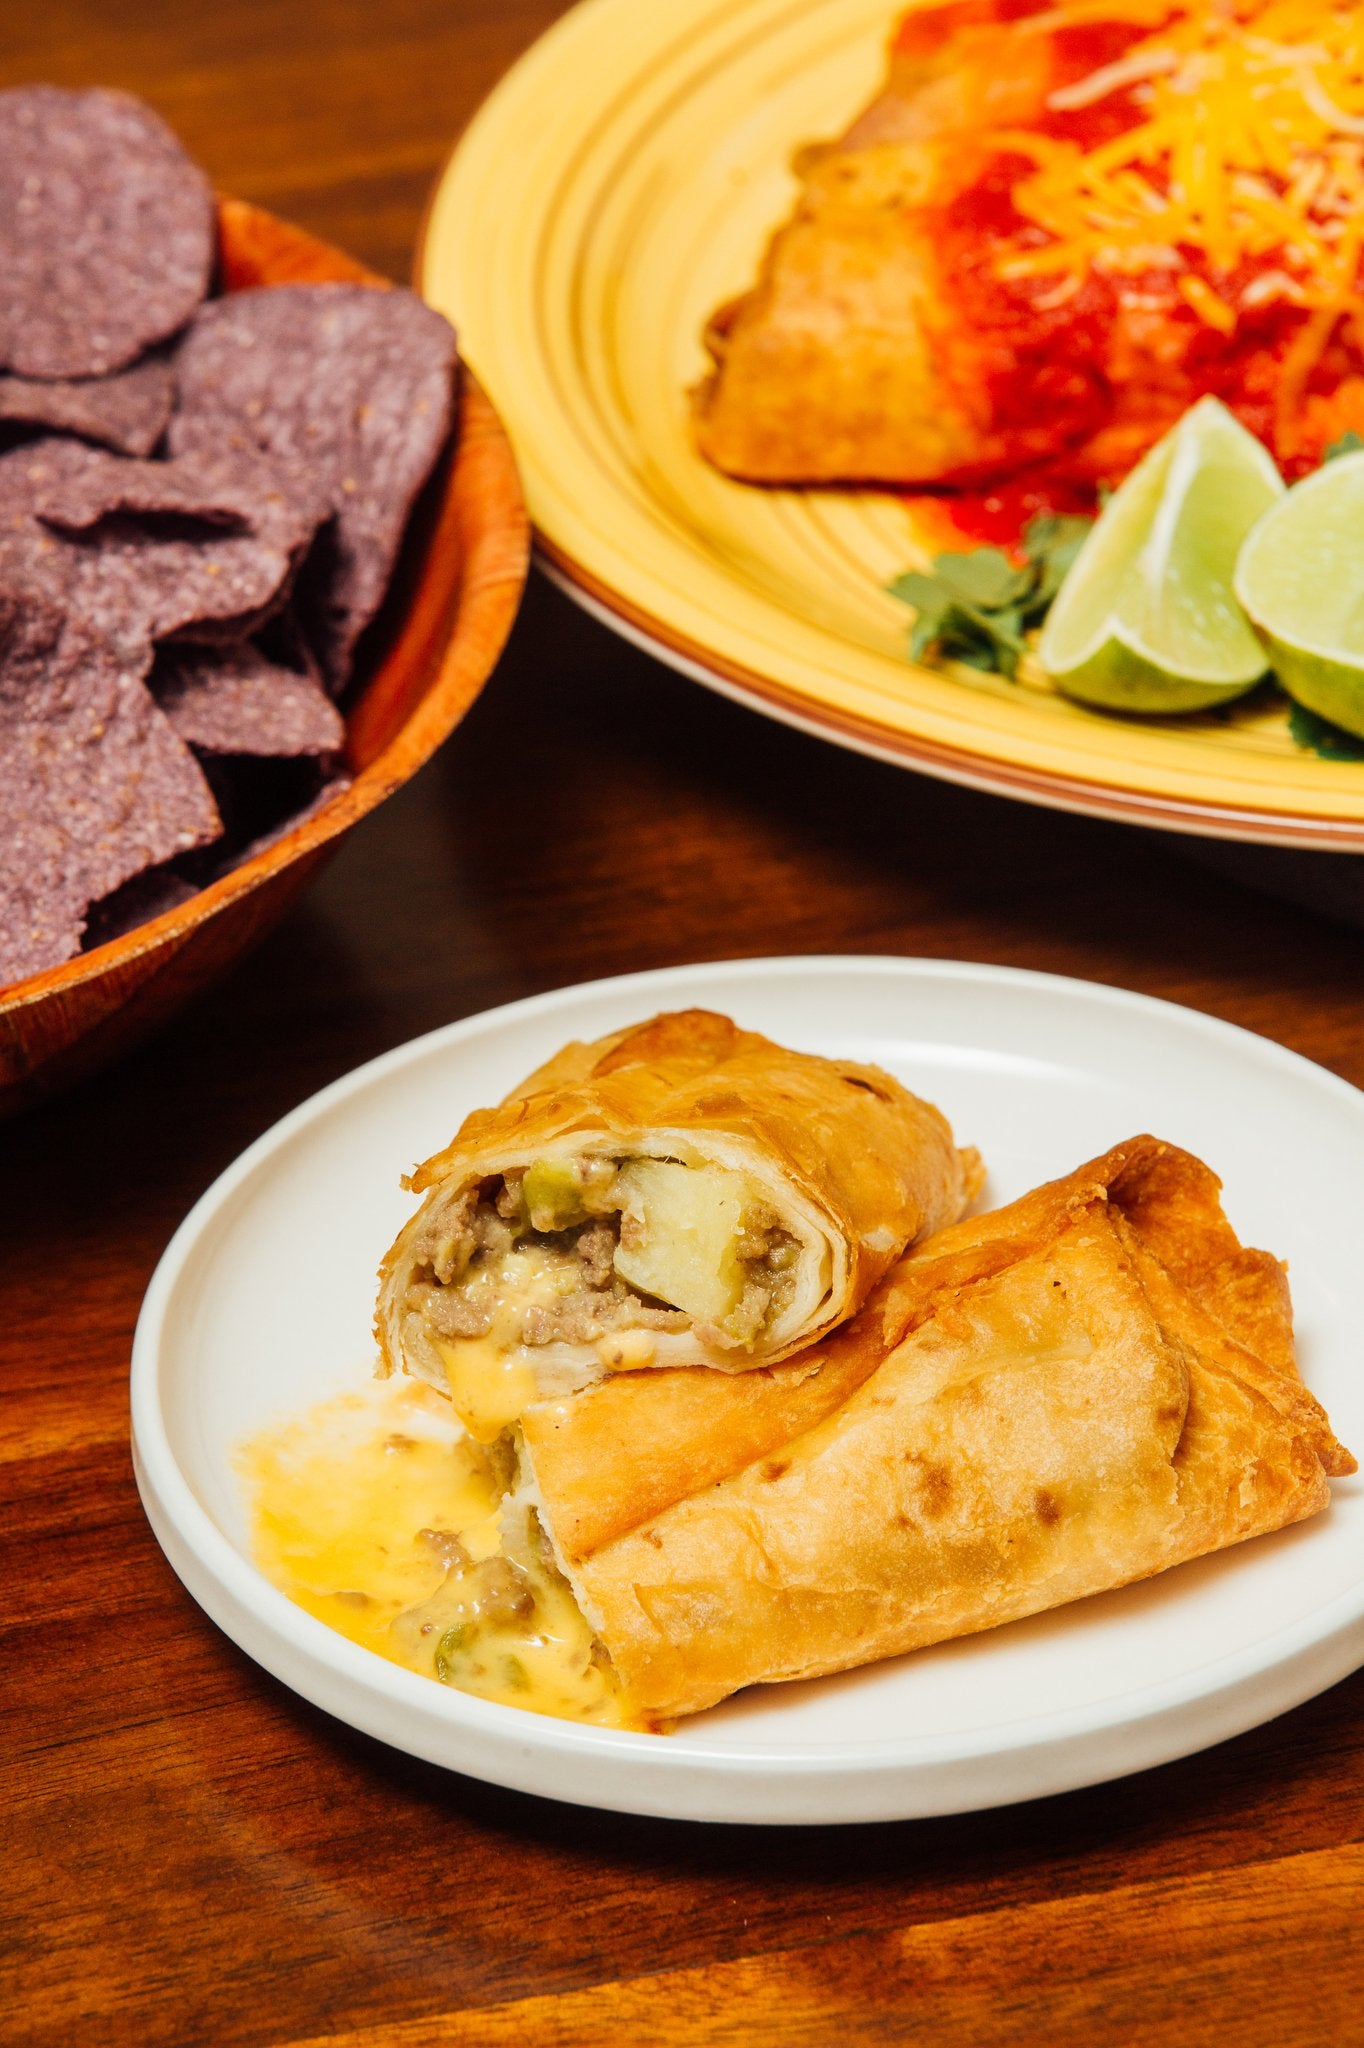 Hatch Green Chile Beef & Cheese Chimichangas - The Fresh Chile Company